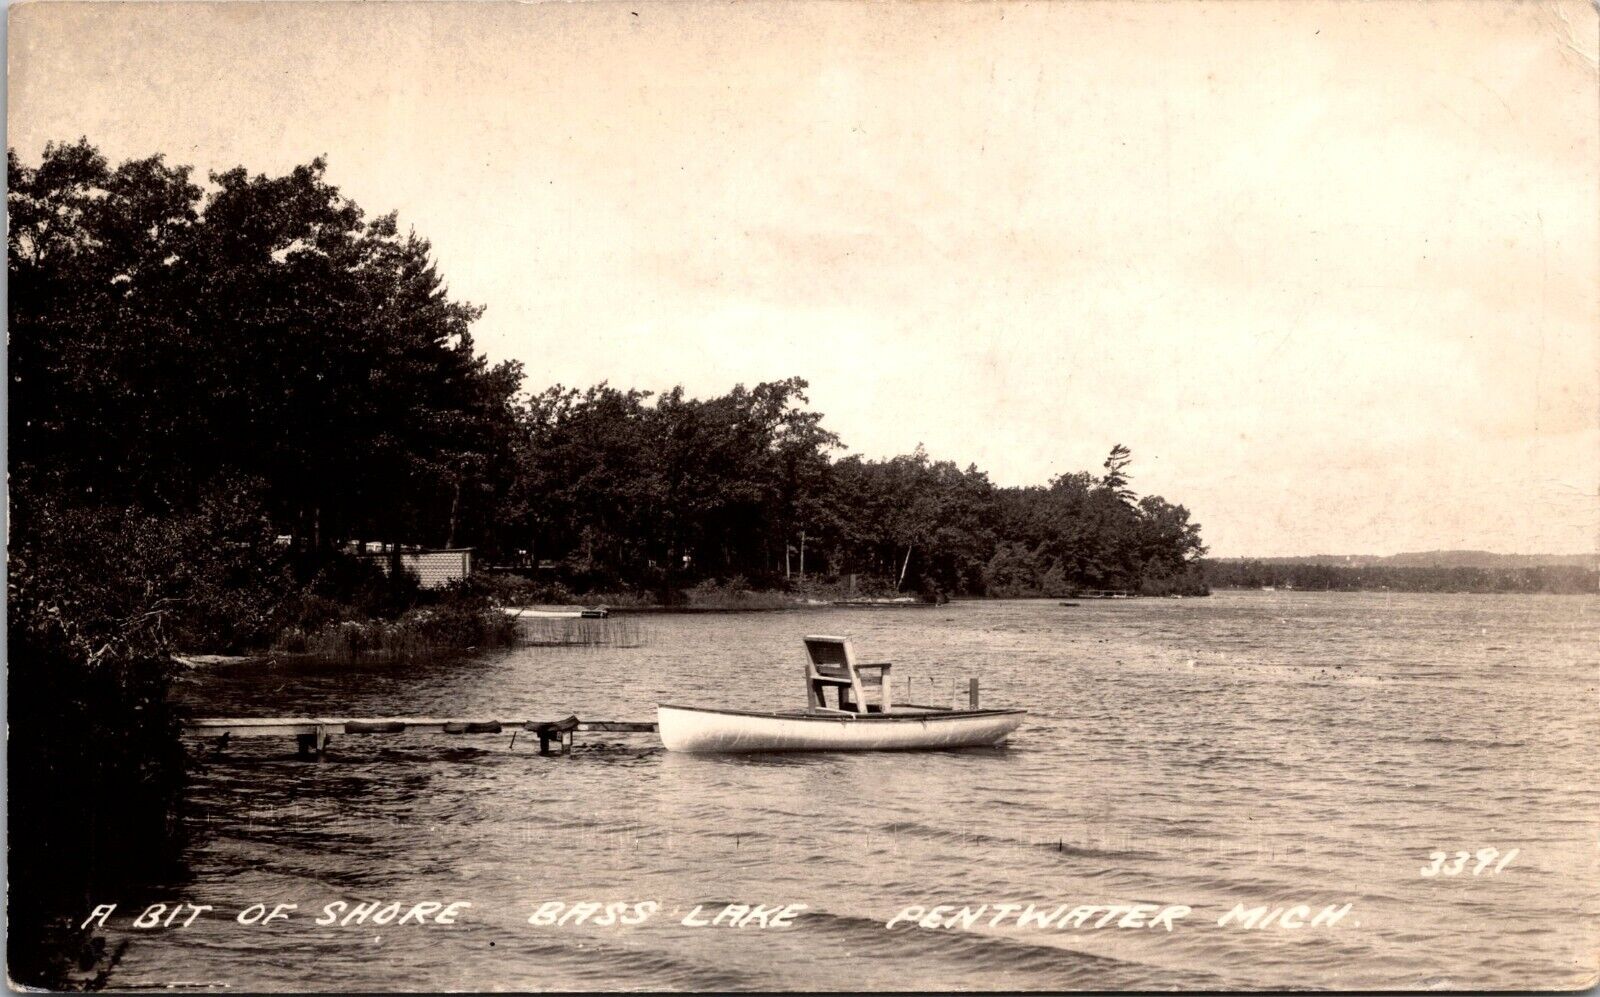 Postcard RPPC Pentwater Michigan A Bit of Shore Bass Lake Dock Boat Unposted